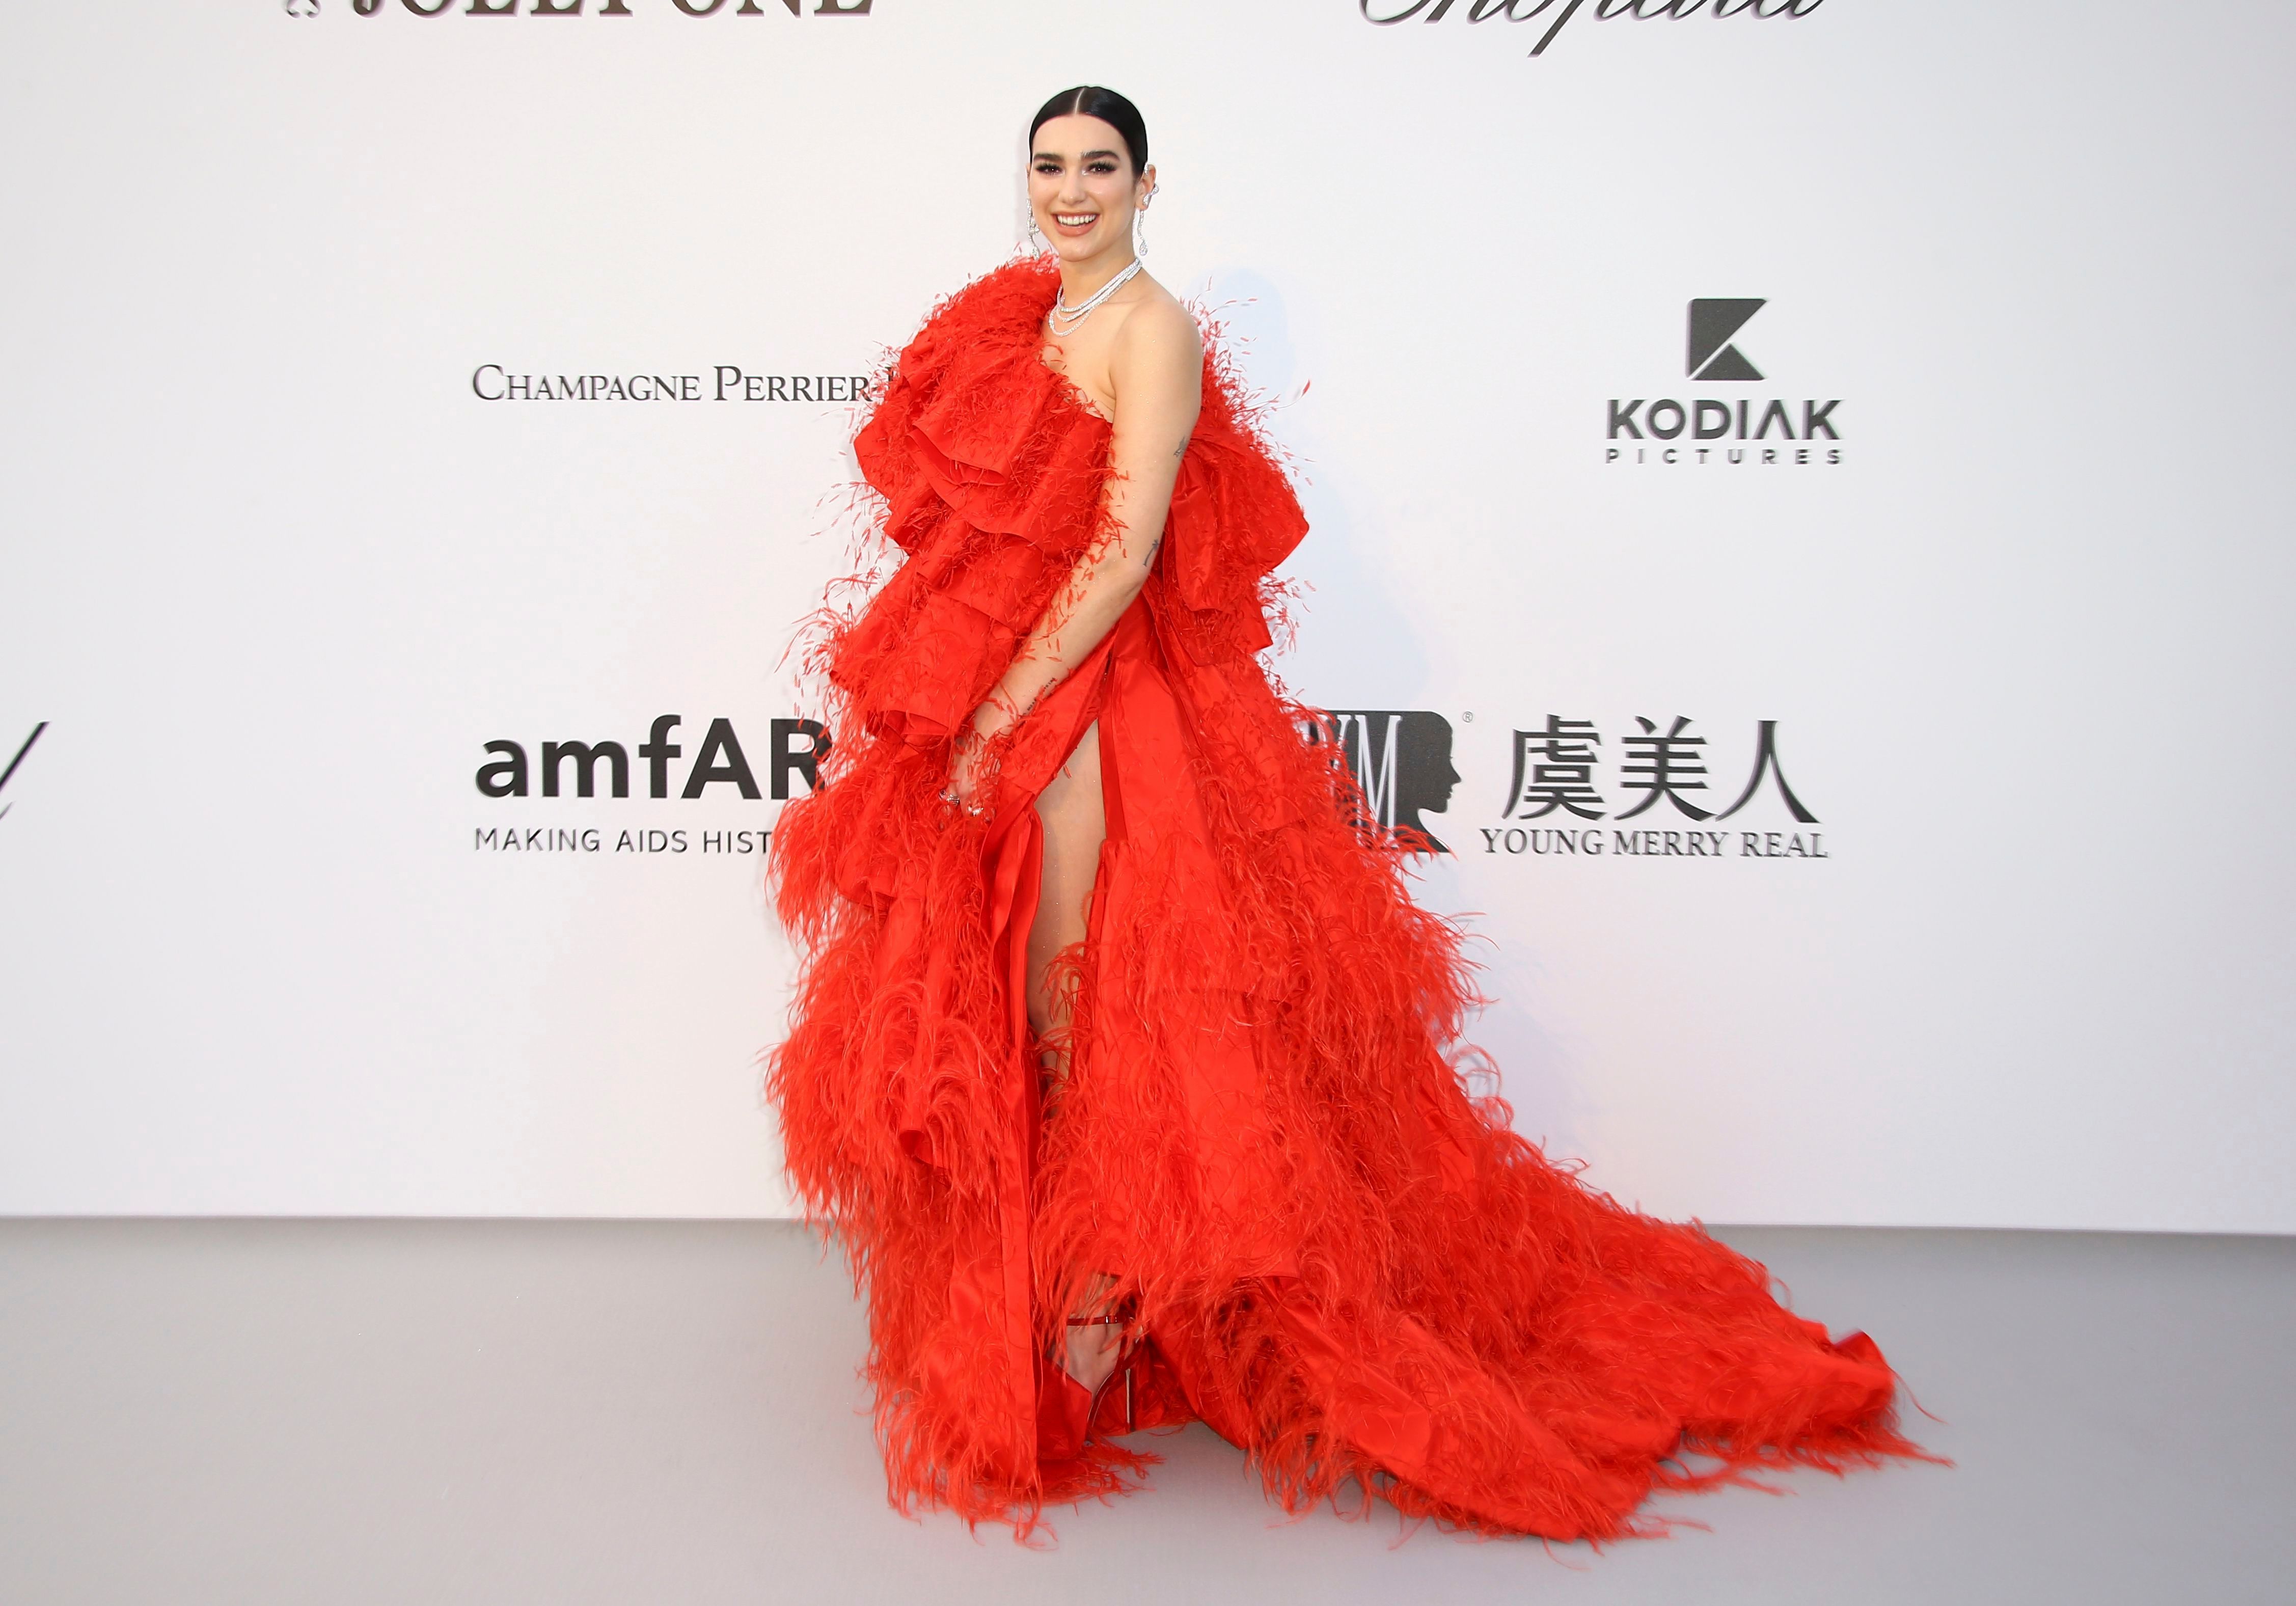 Dua Lipa Wears a Red Valentino Couture Gown the 2019 amfAR Gala in France